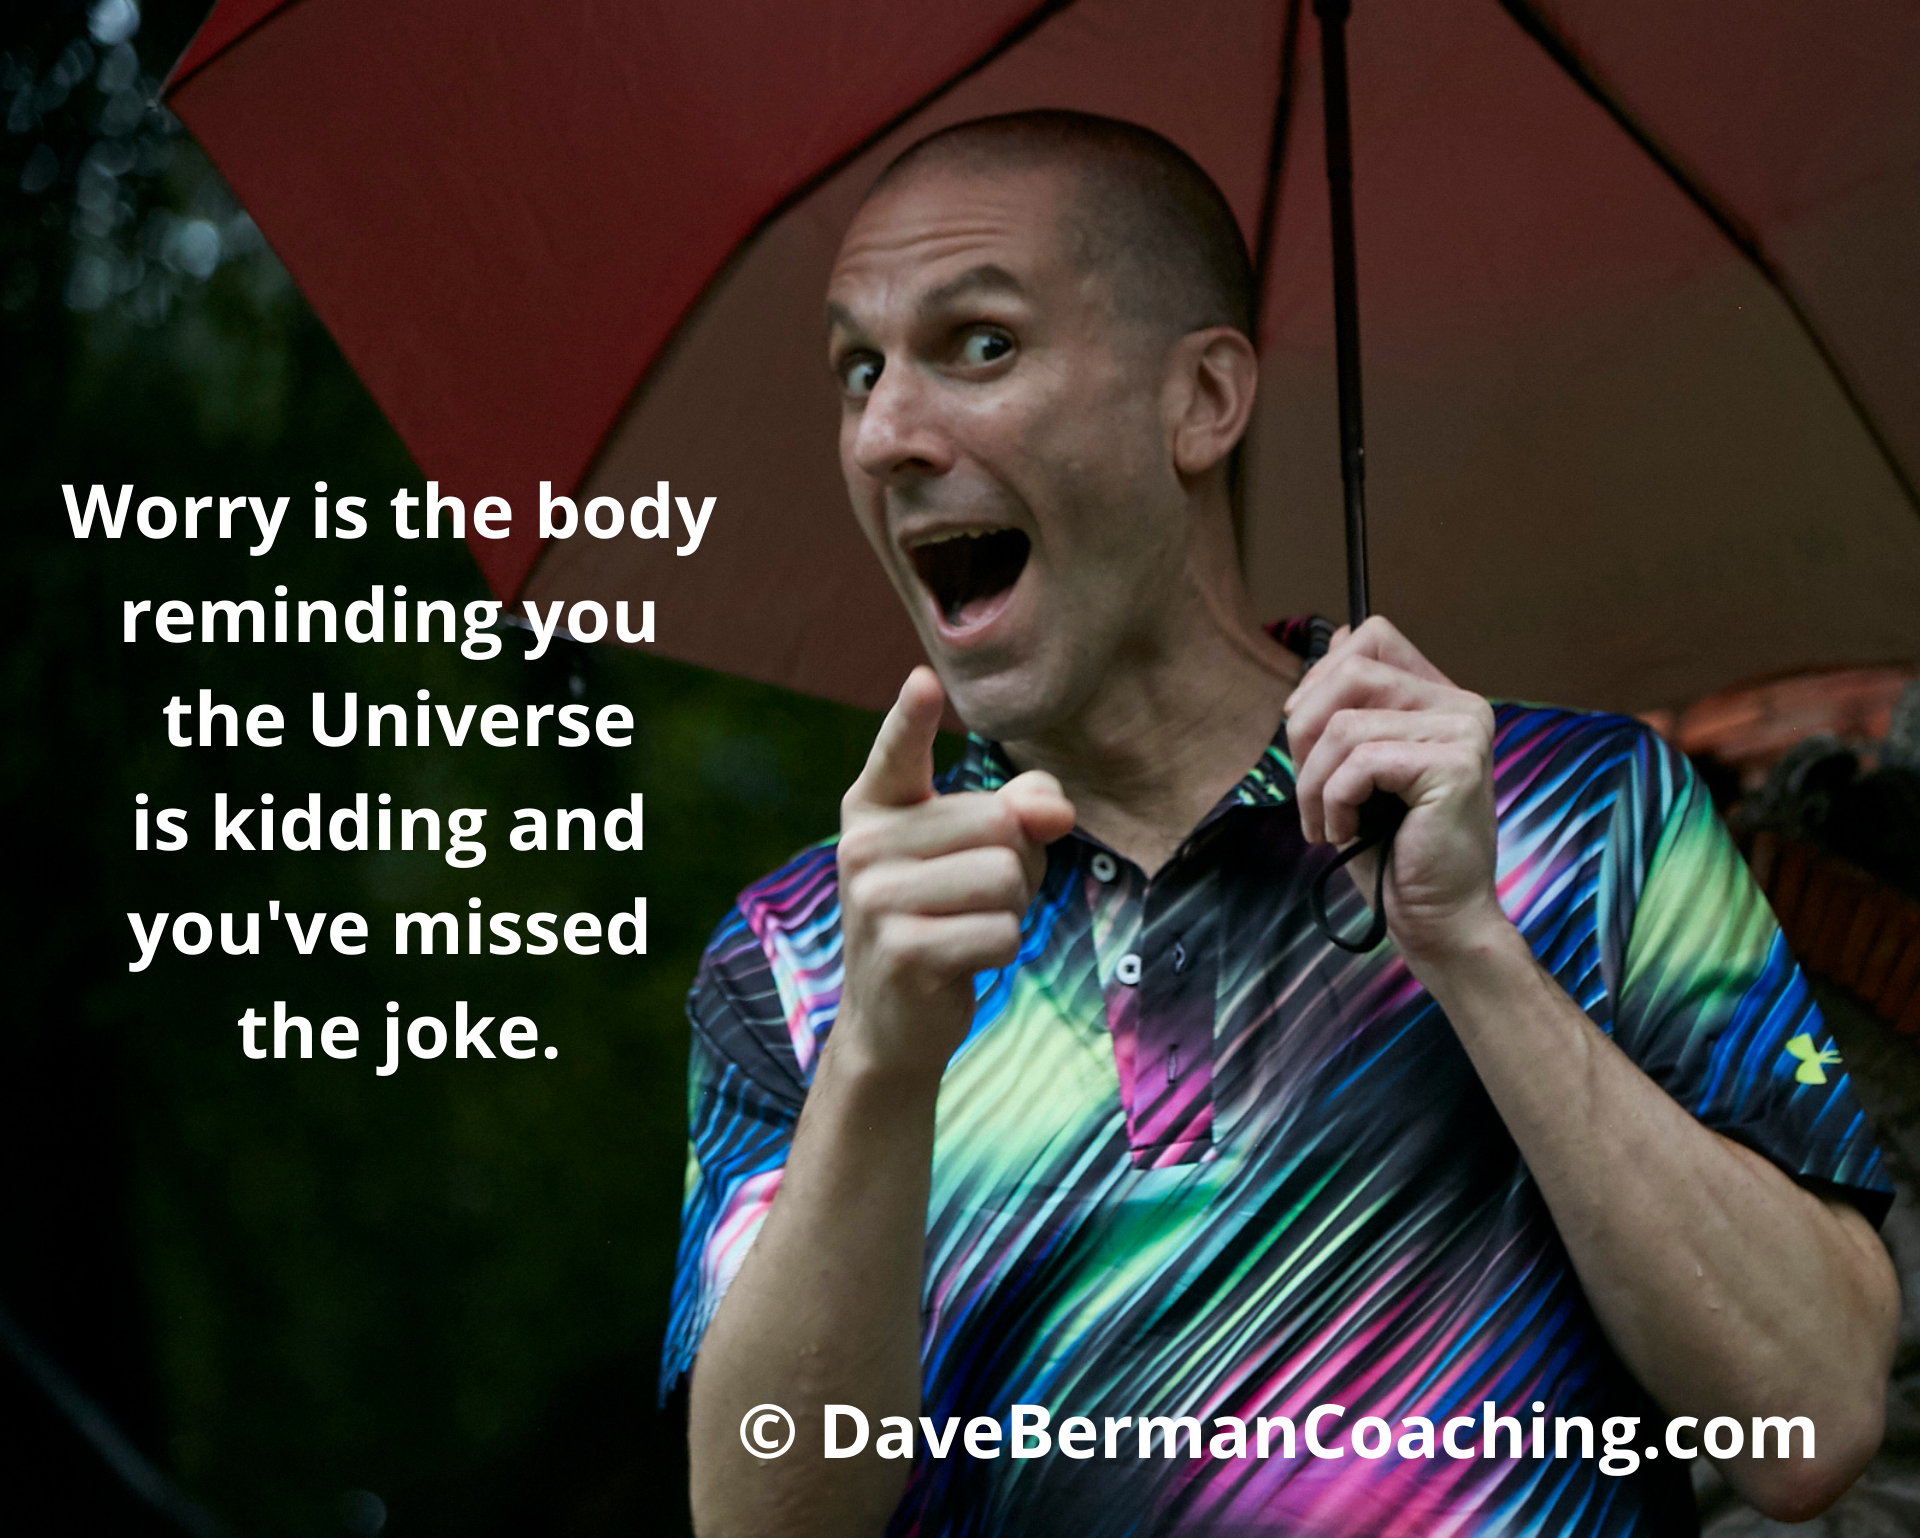 Dave Berman points to the quote "Worry is the body reminding you the Universe is kidding and you've missed the joke." © DaveBermanCoaching.com